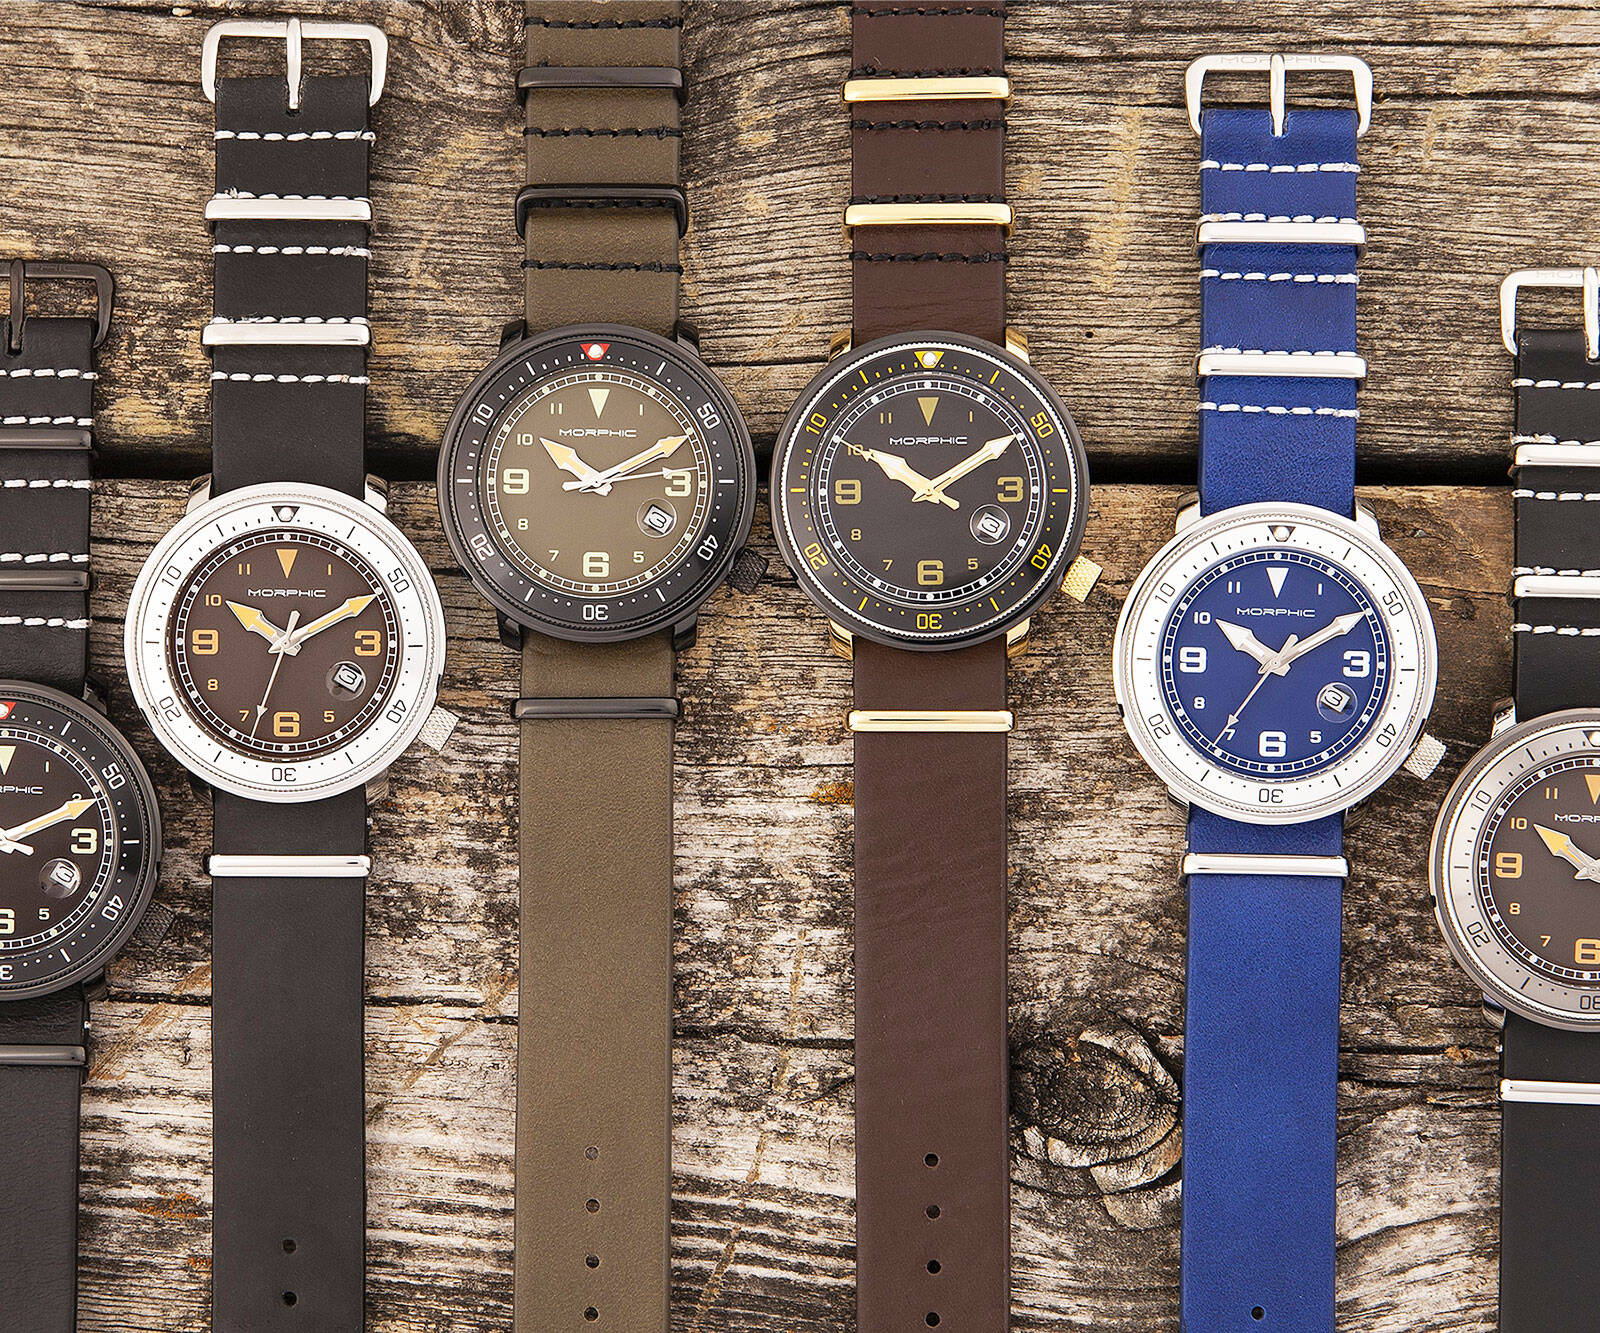 Morphic M58 Series Watches - coolthings.us